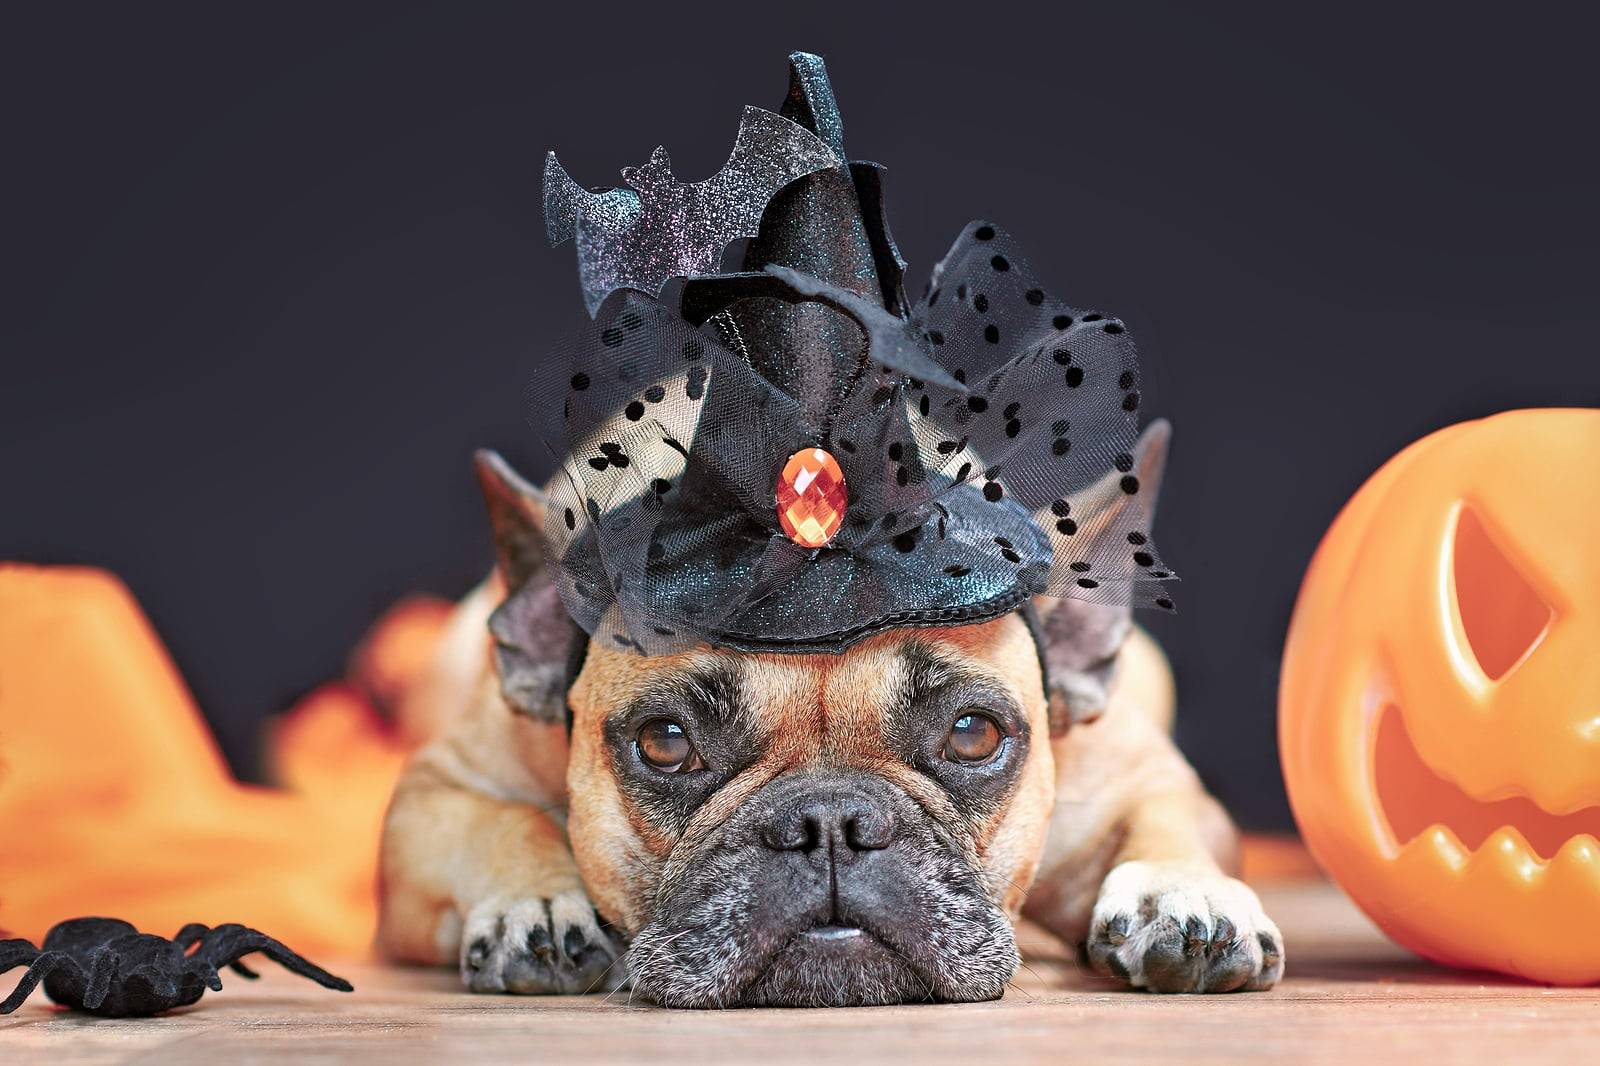 Top 6 Lord of the Rings Dog Costumes for Halloween